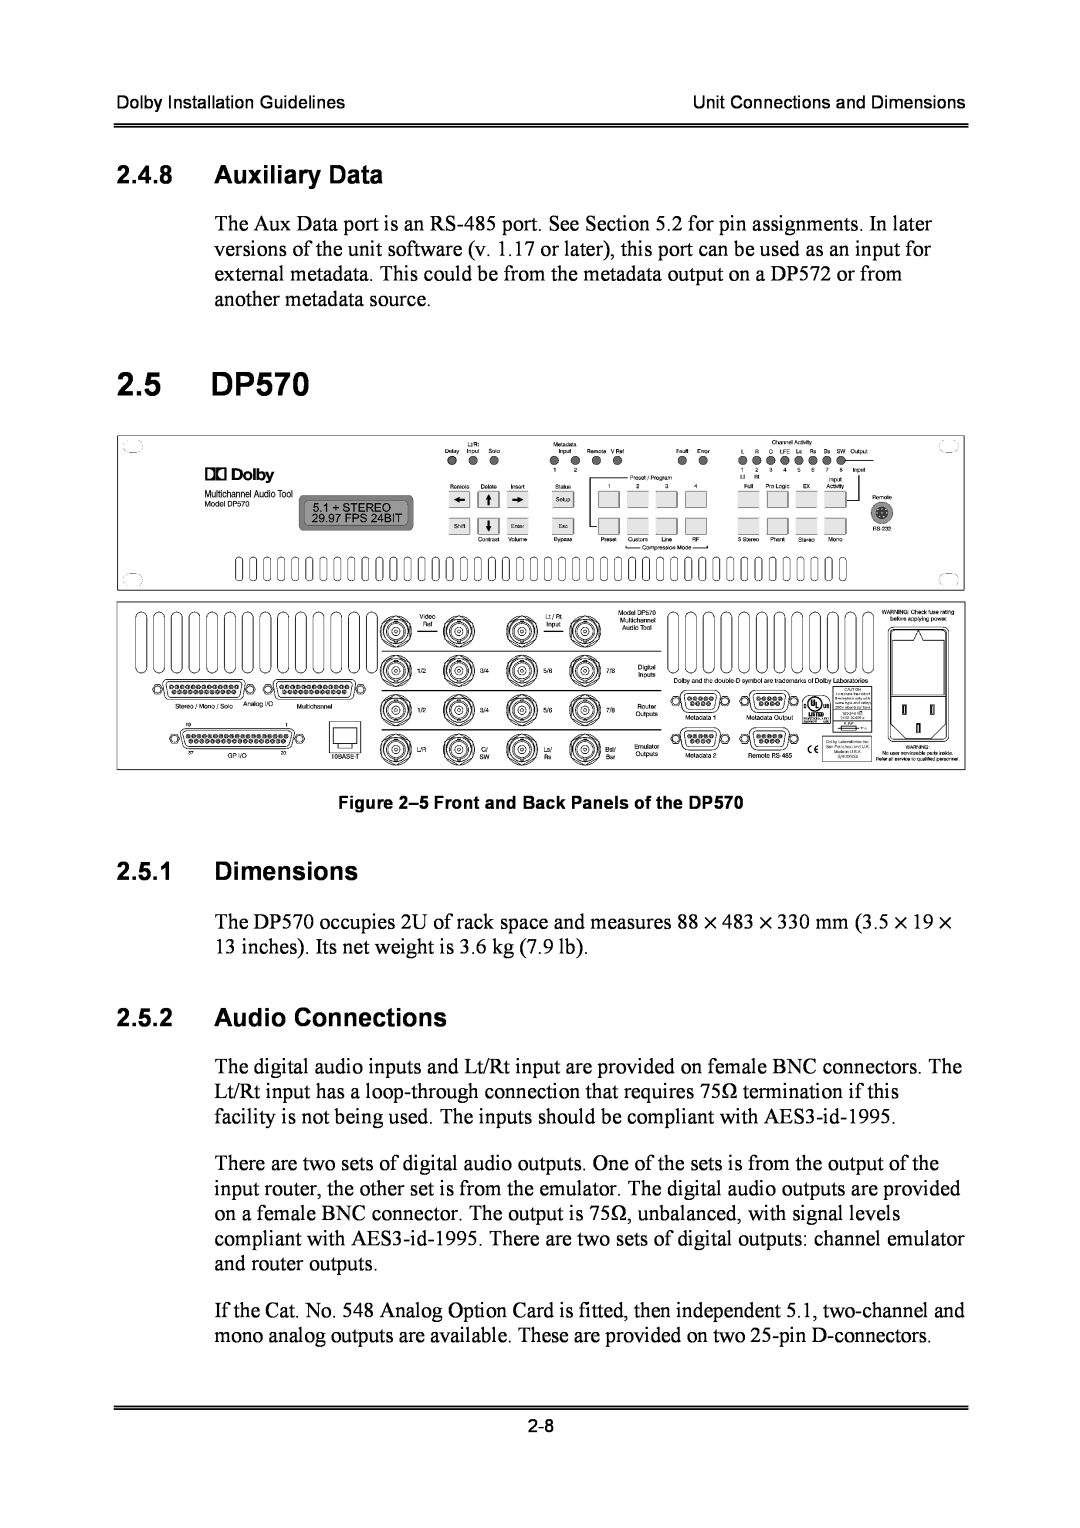 Dolby Laboratories S01/13621 manual 2.5DP570, 2.4.8Auxiliary Data, 2.5.1Dimensions, 2.5.2Audio Connections 